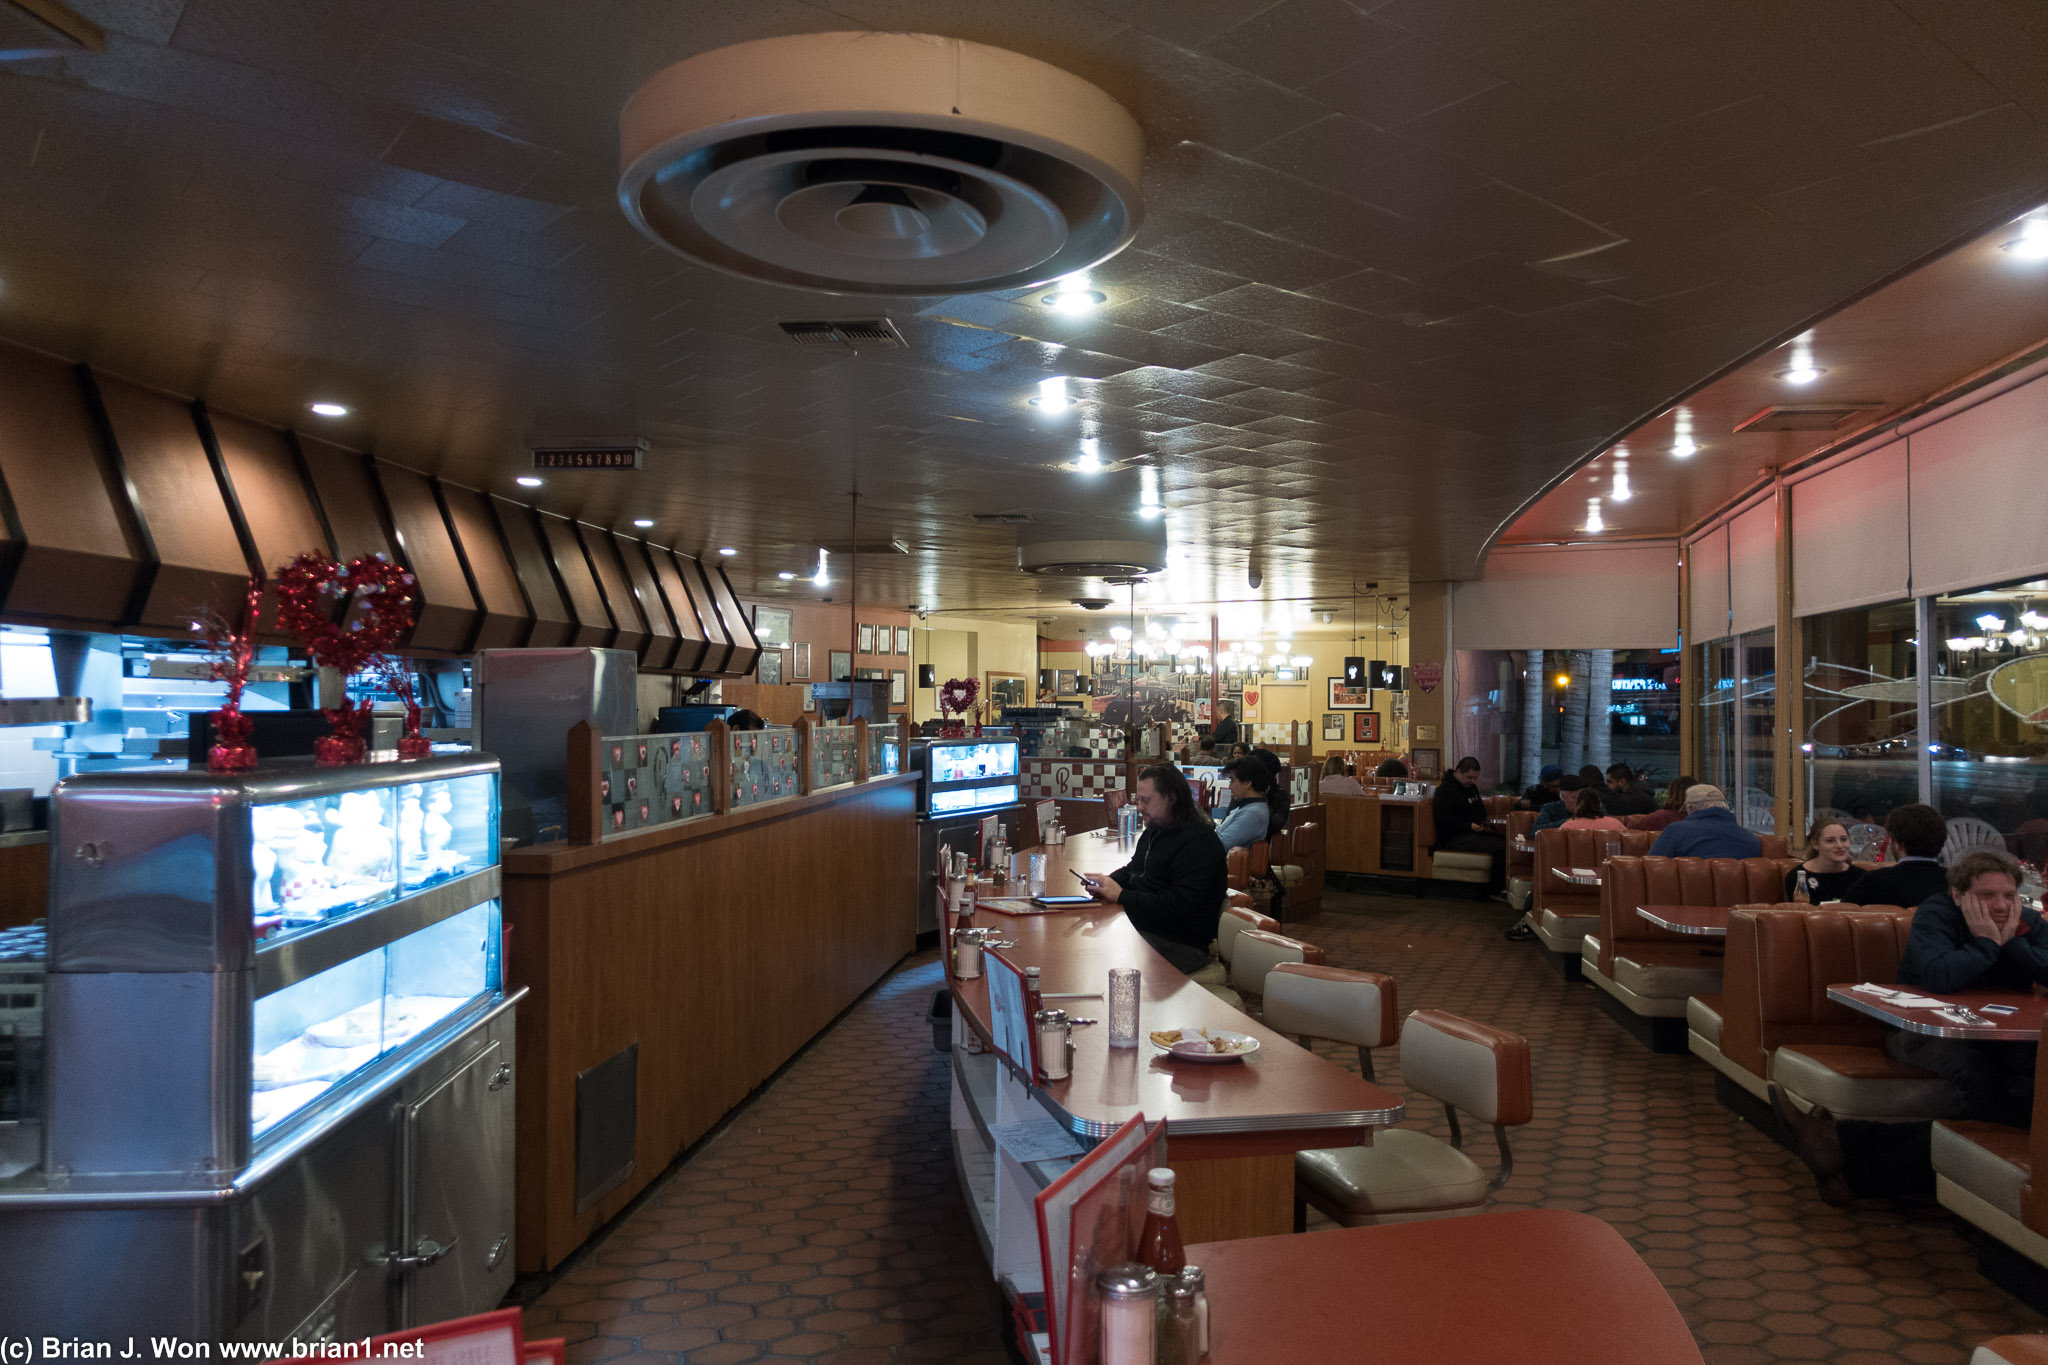 One of the few 1940s diners left.